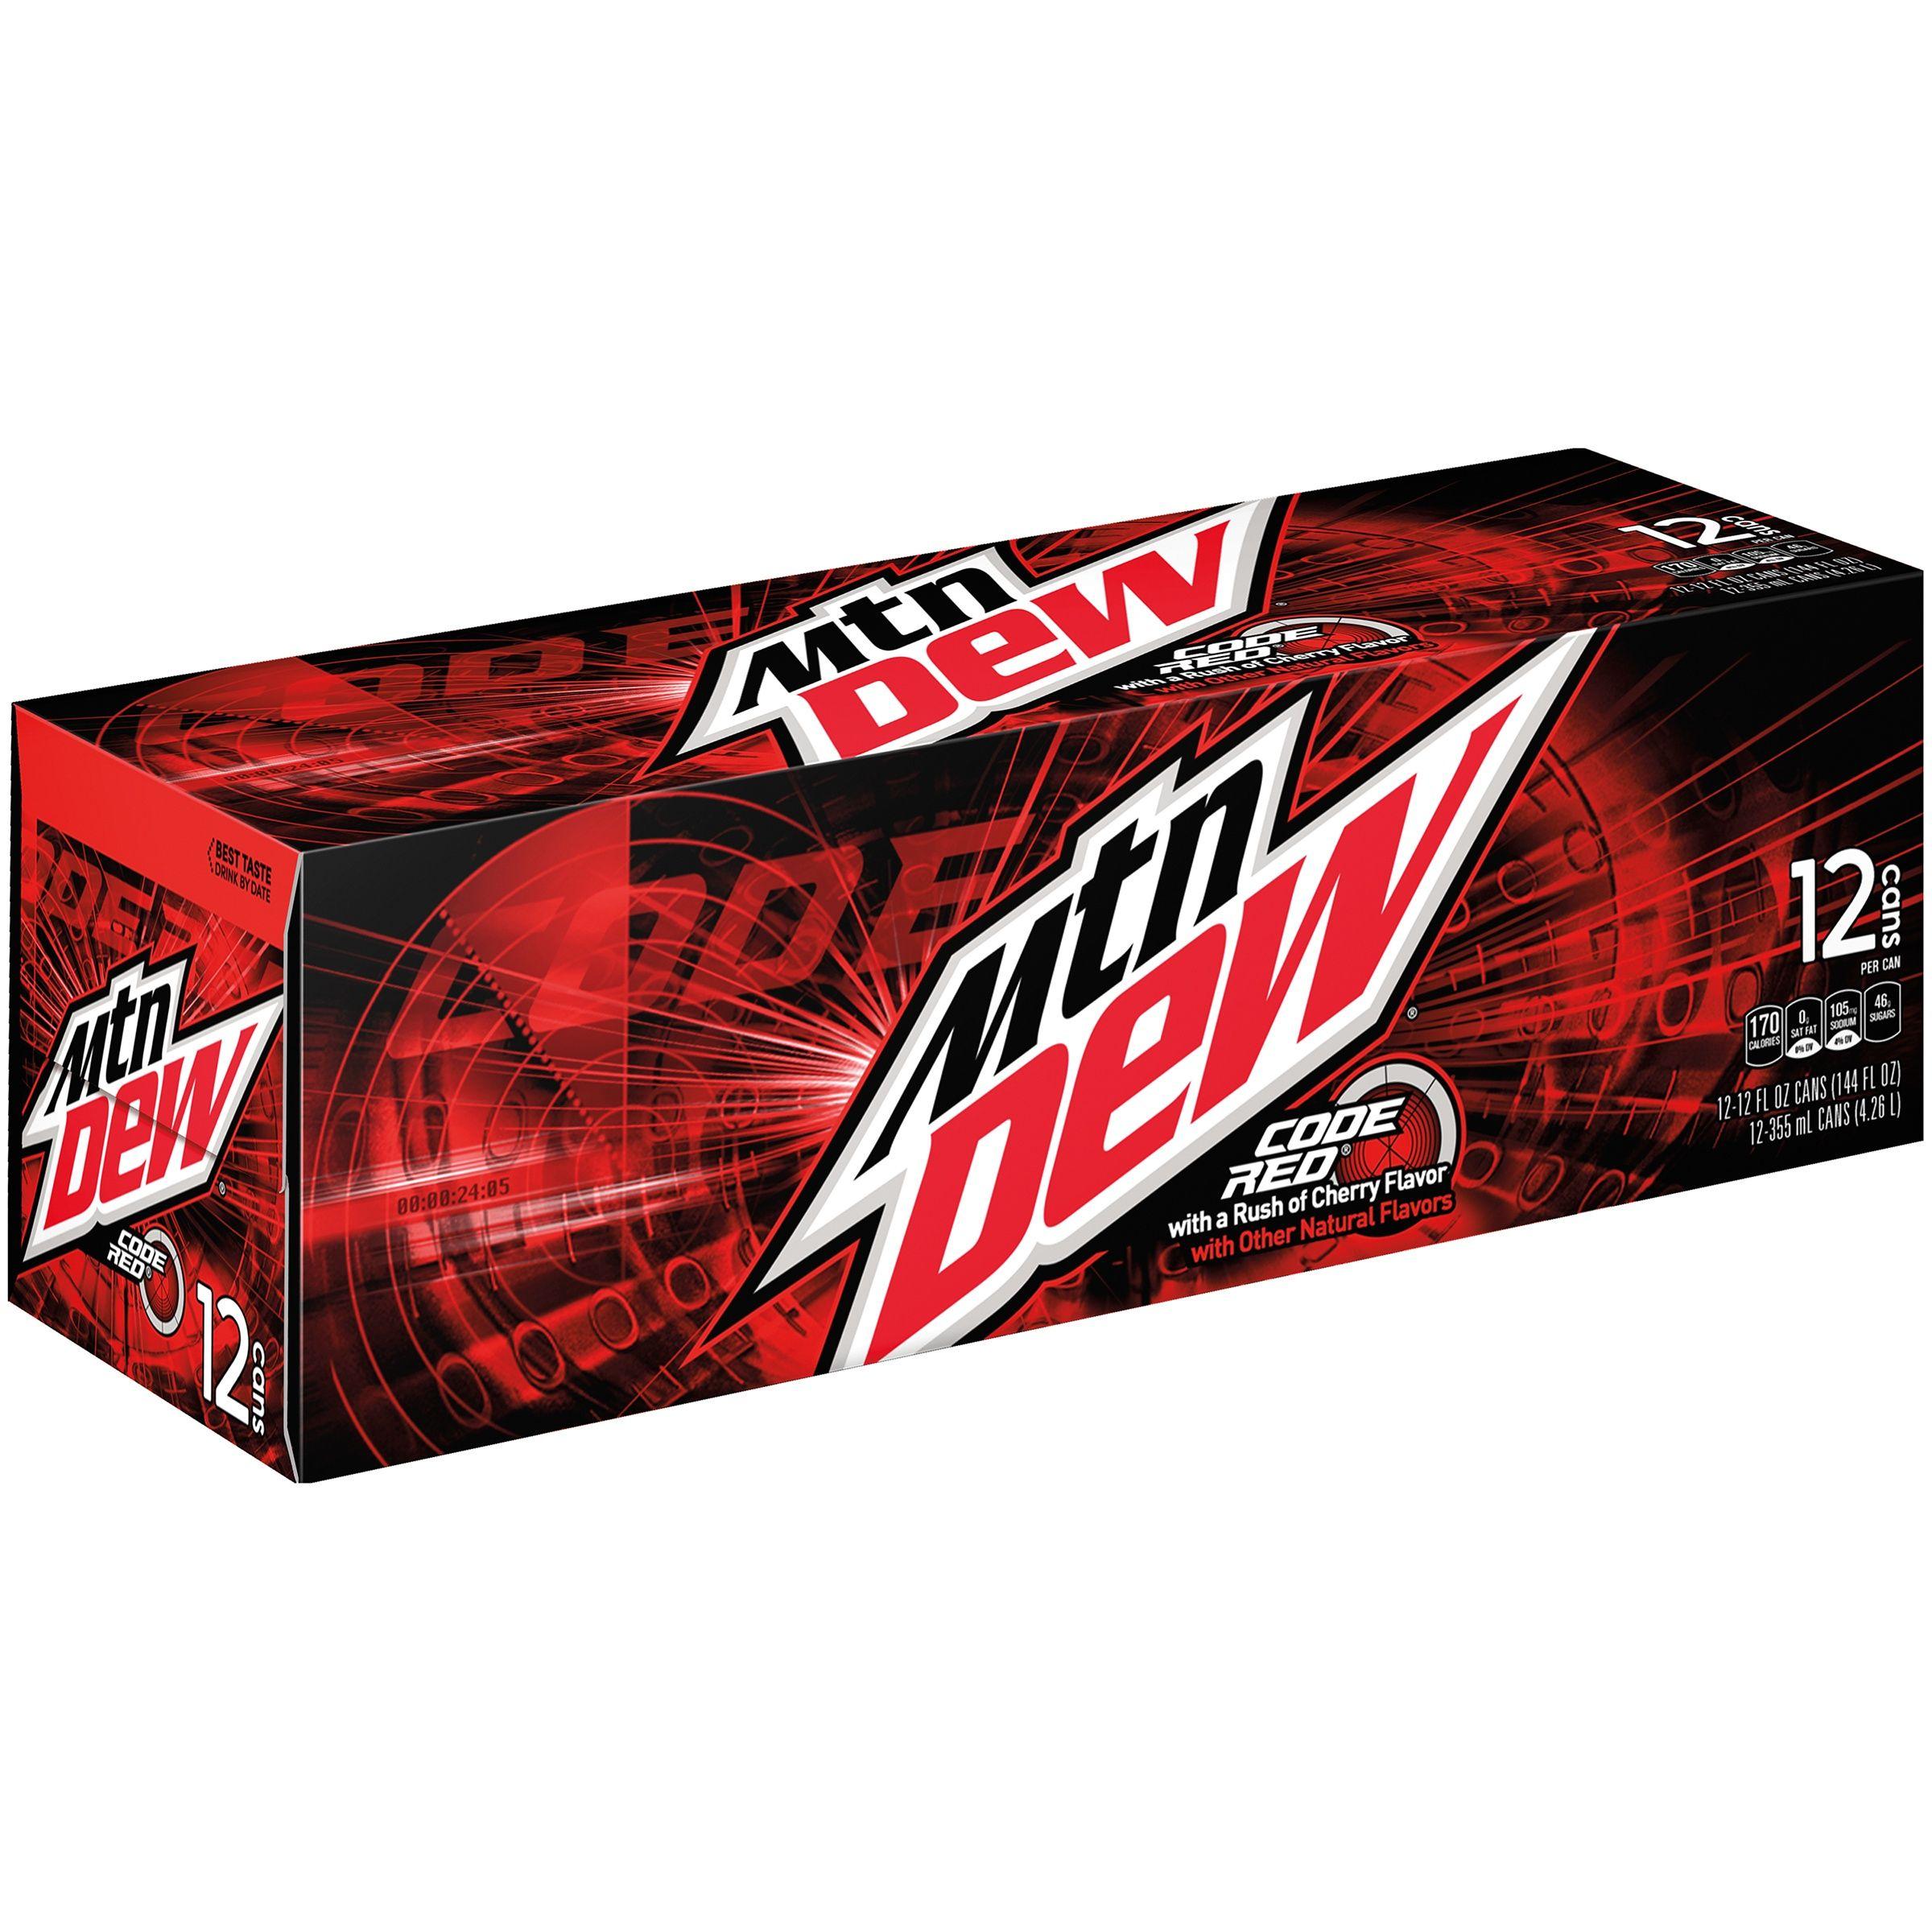 Mtn Dew Code Red Logo - Mountain Dew Code Red Soda, 12 fl oz Cans, 12 Count - Walmart.com